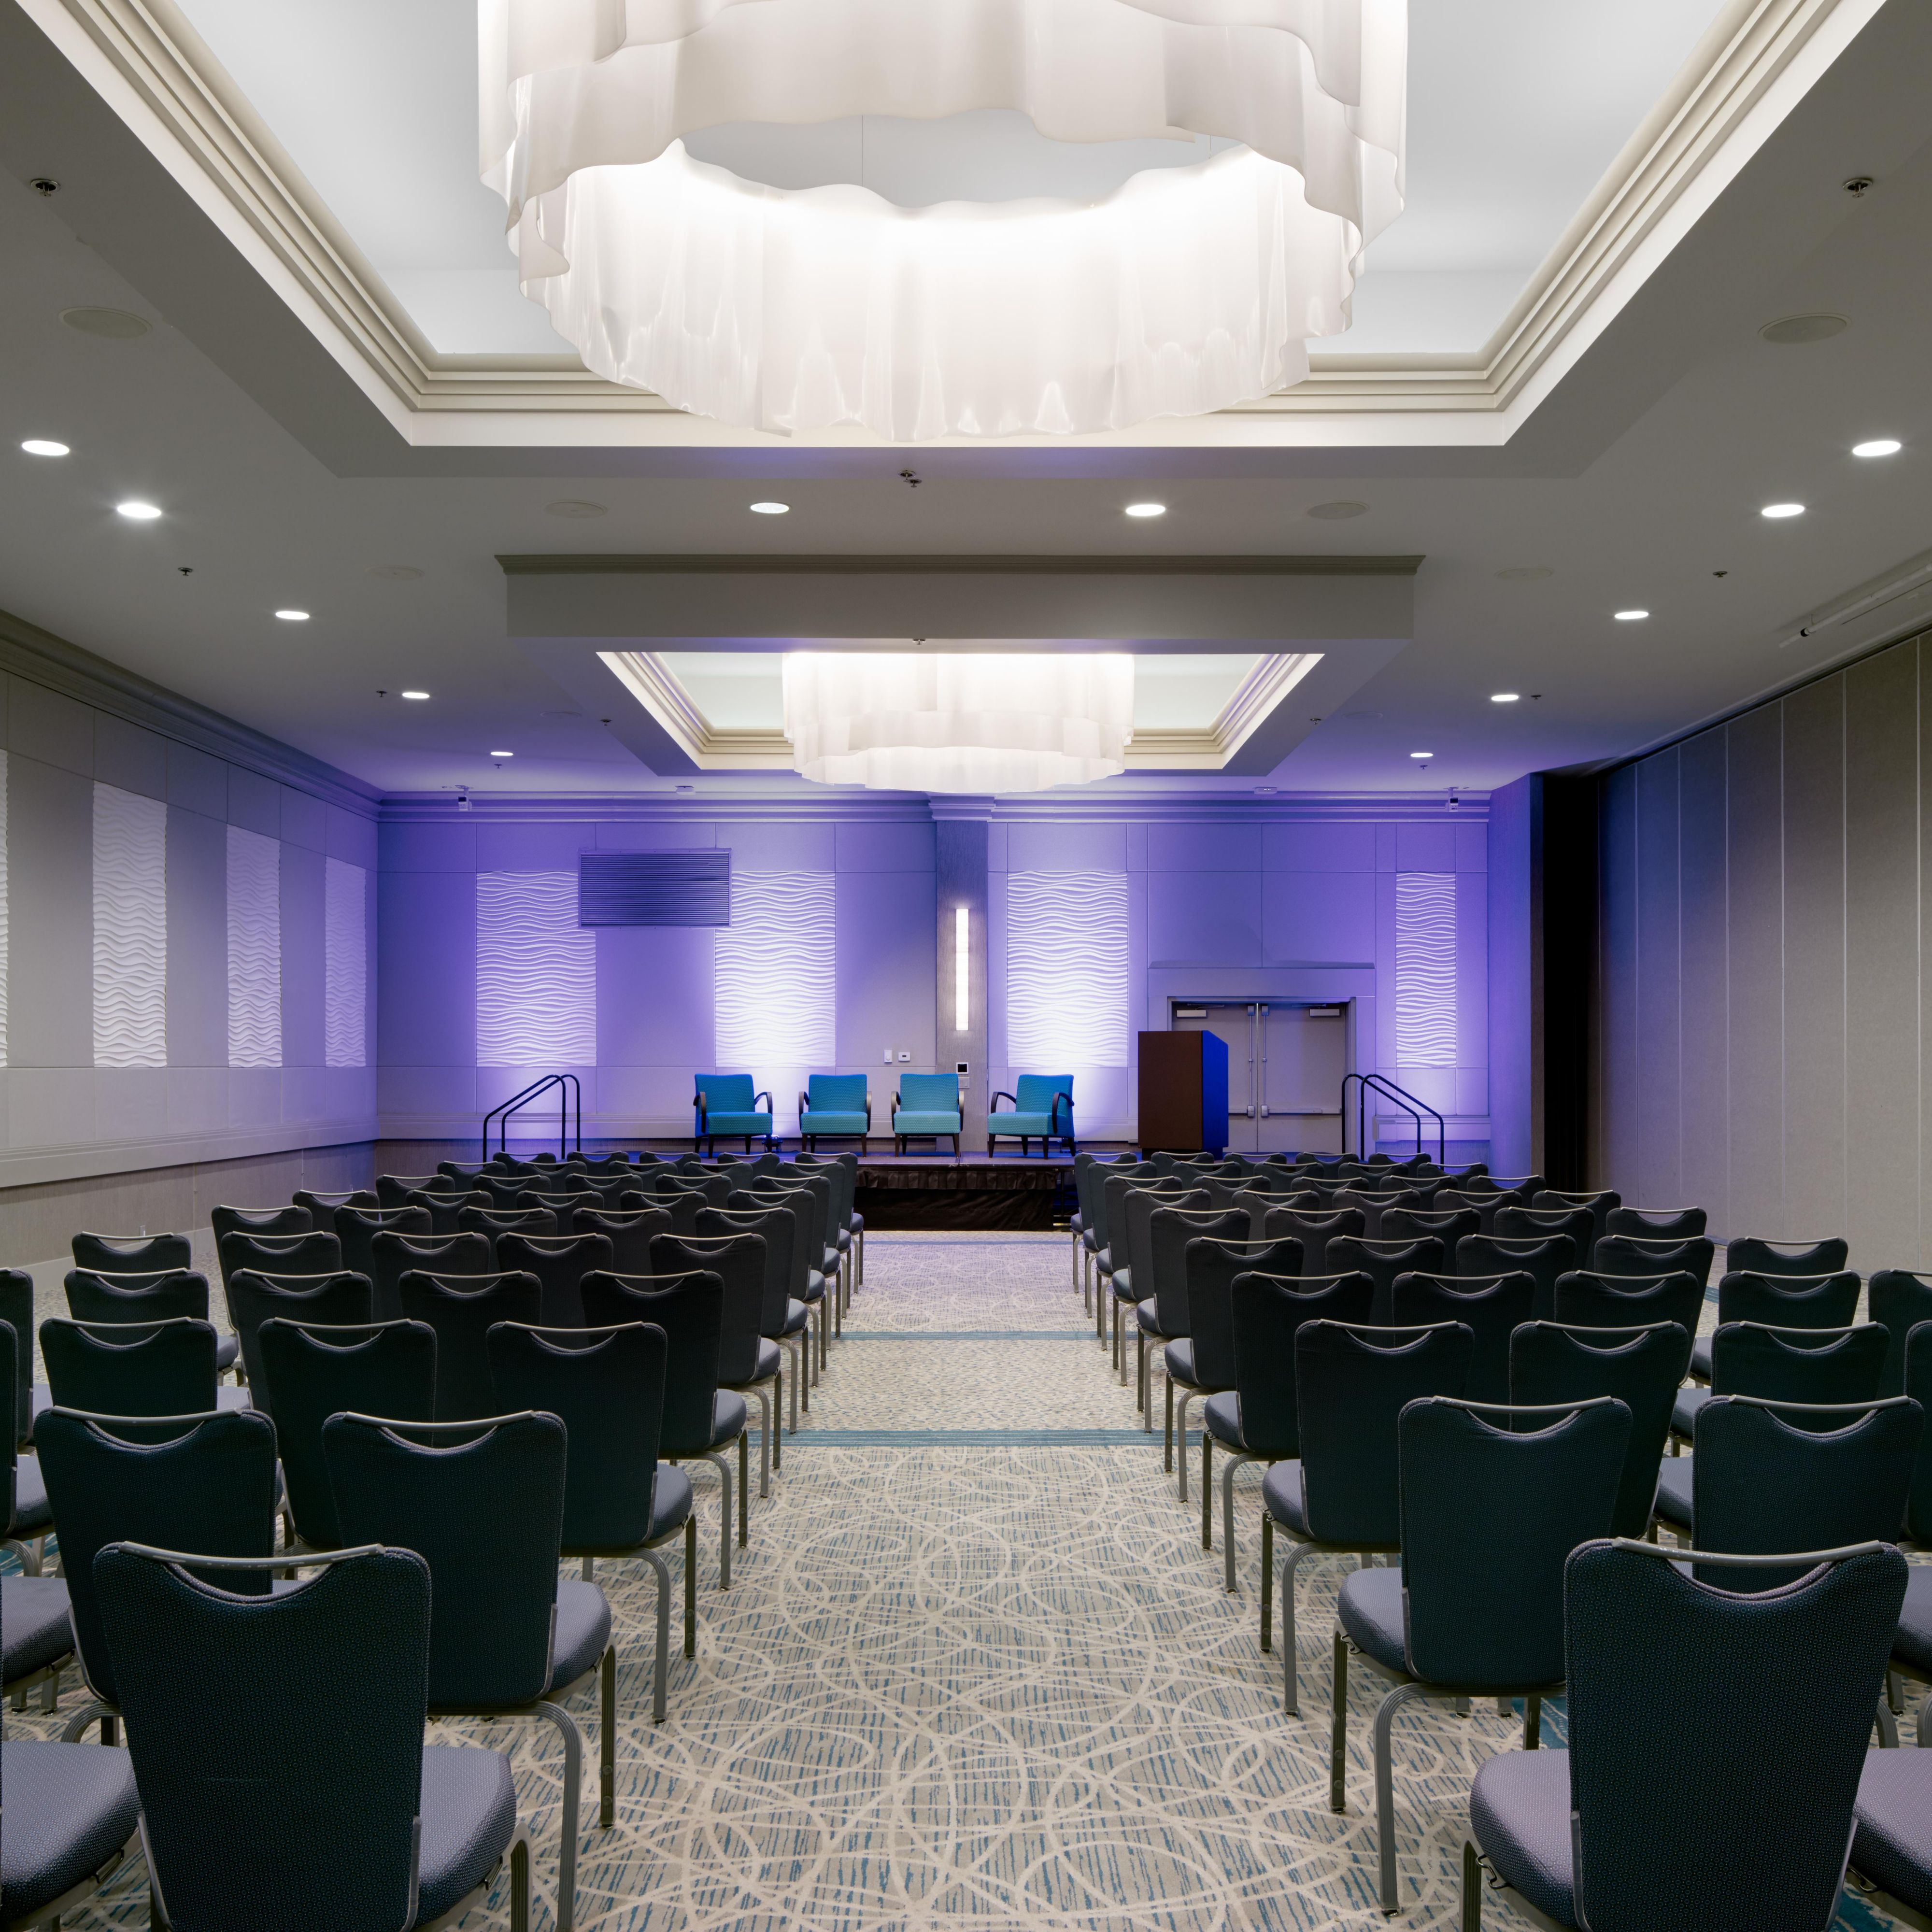 Plan your next seminar with the most flexible event space in town